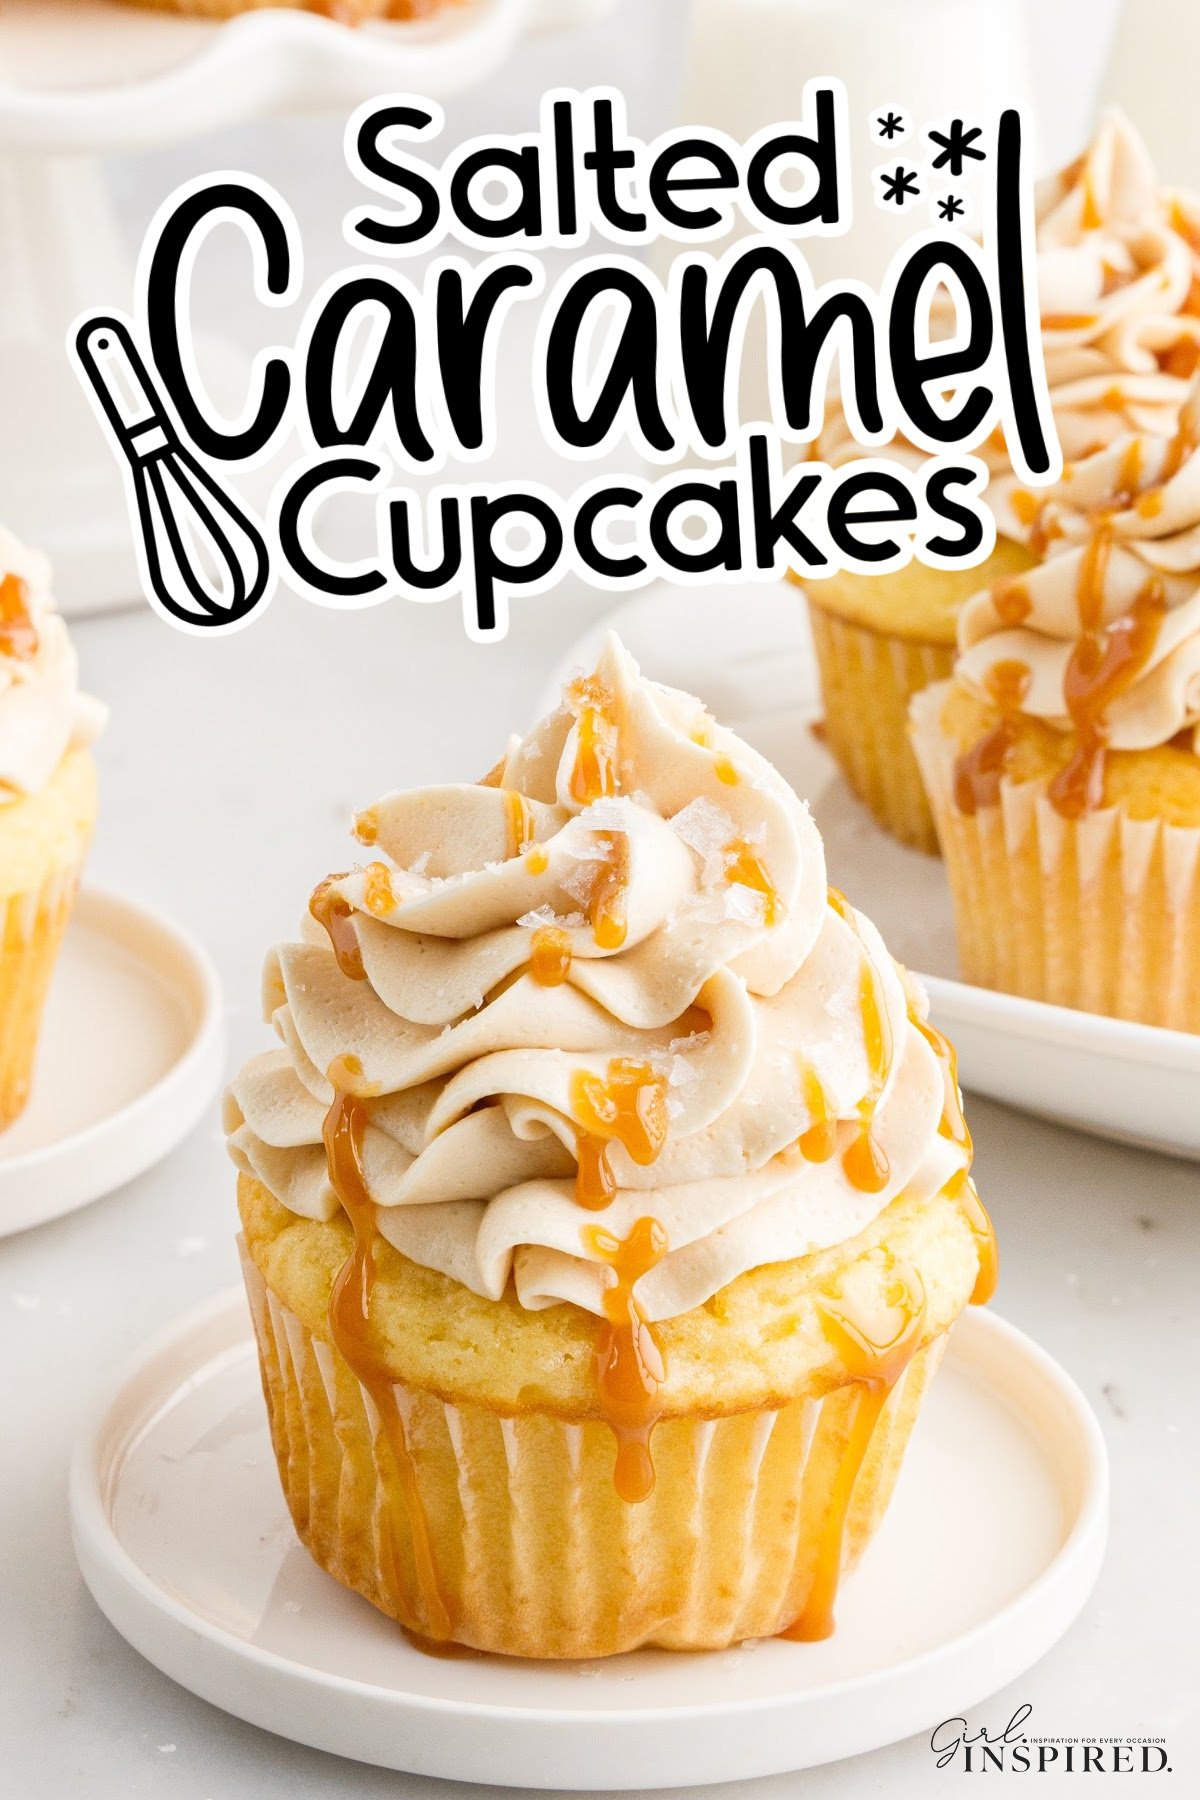 Salted Caramel Cupcakes on a plate, drizzled with caramel over the frosting, with text overlay.